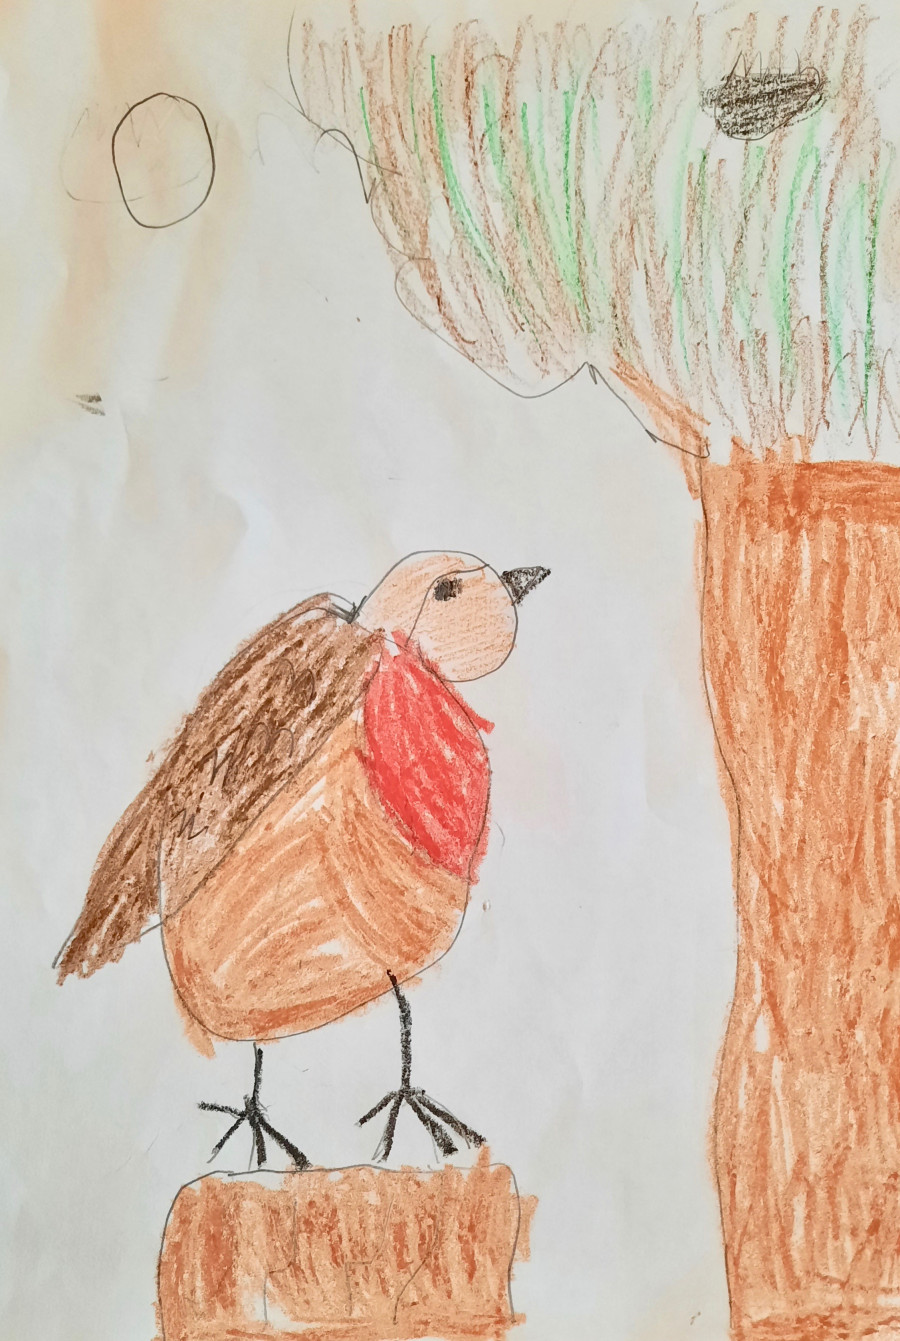 'The Little Robin' by Cillian (7) from Tipperary